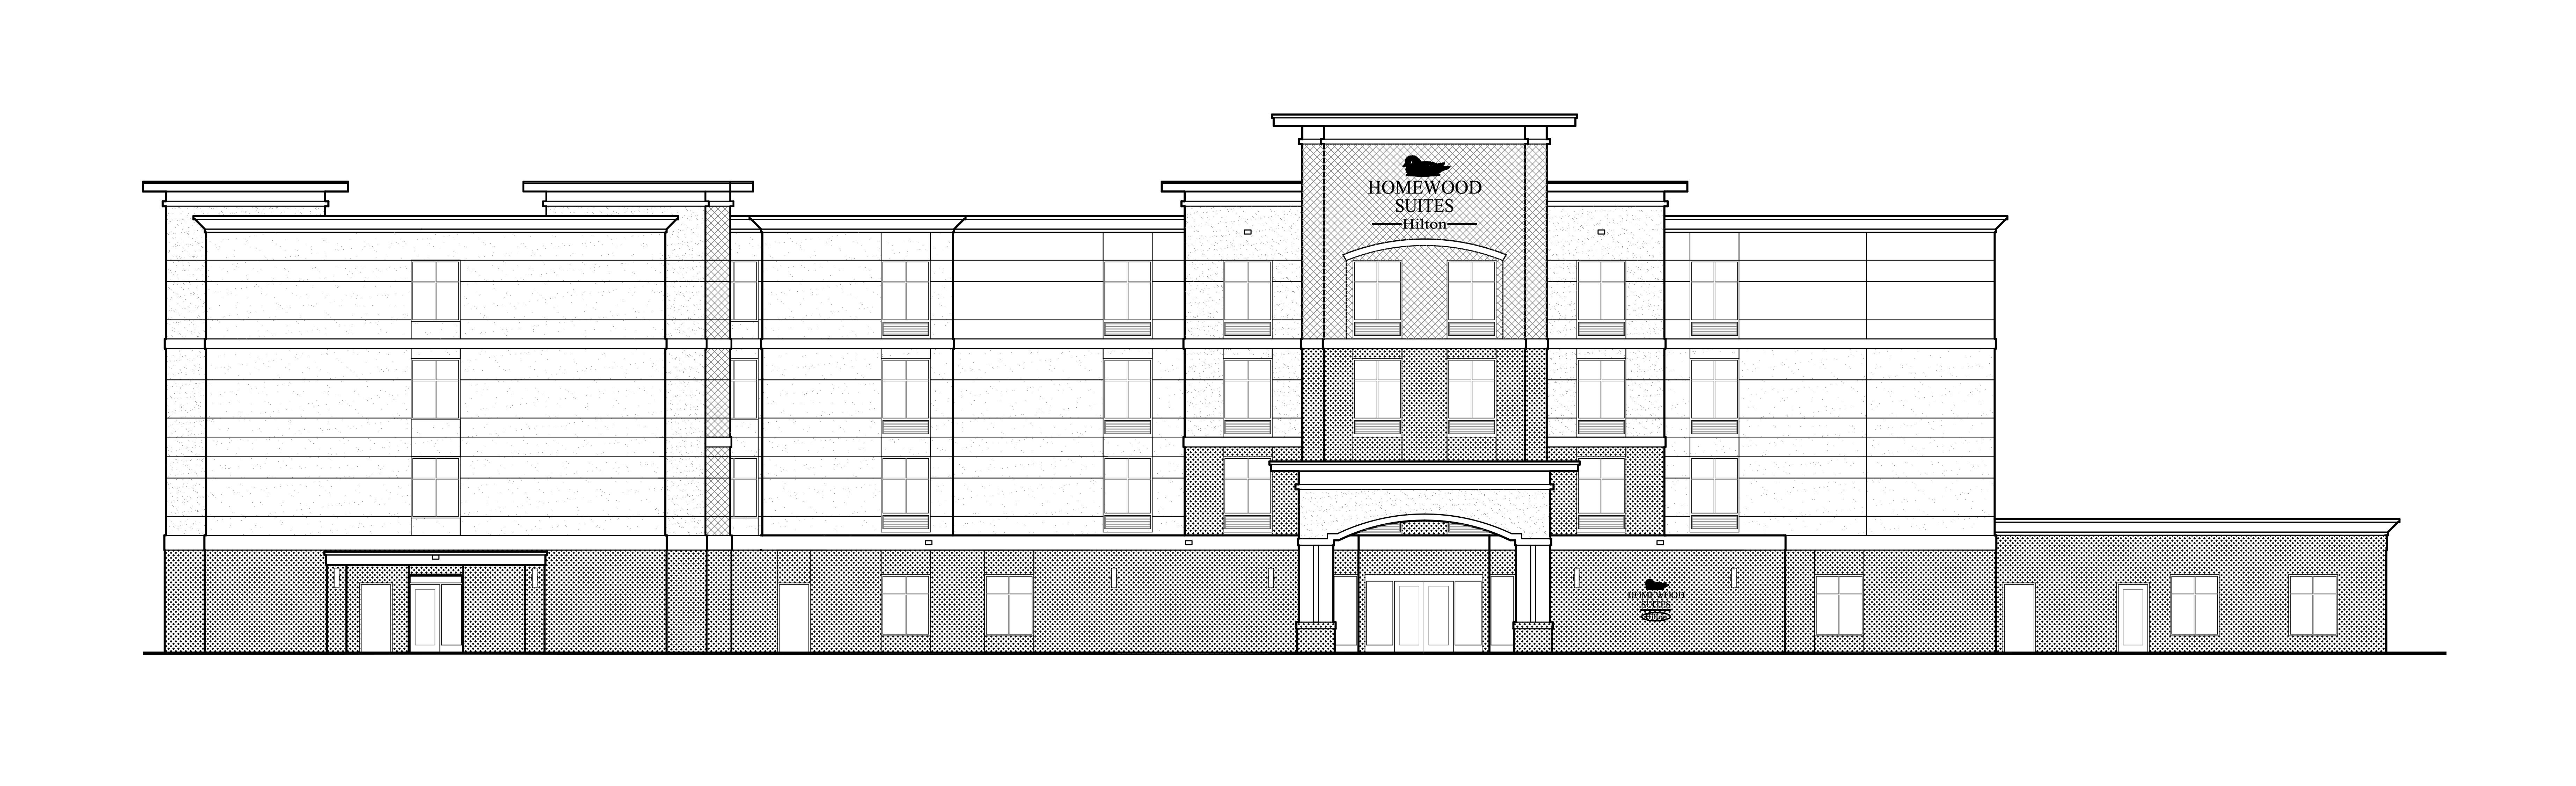 Construction To Begin On New Homewood Suites 48 Acre Site Will